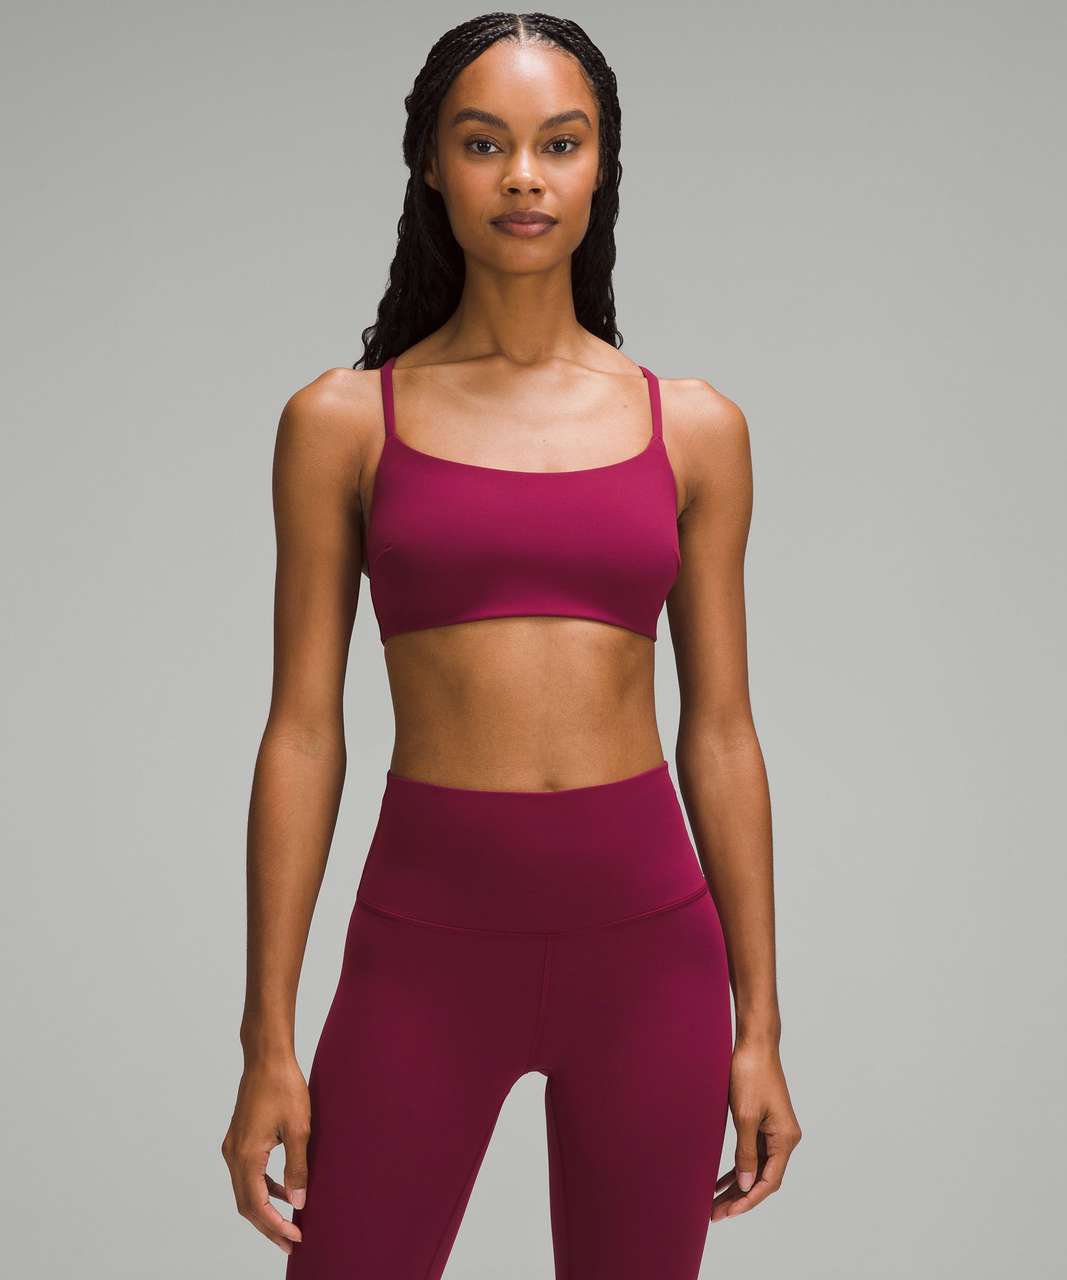 Lululemon Wunder Train Strappy Racer Bra *Light Support, C/D Cup - Deep Luxe